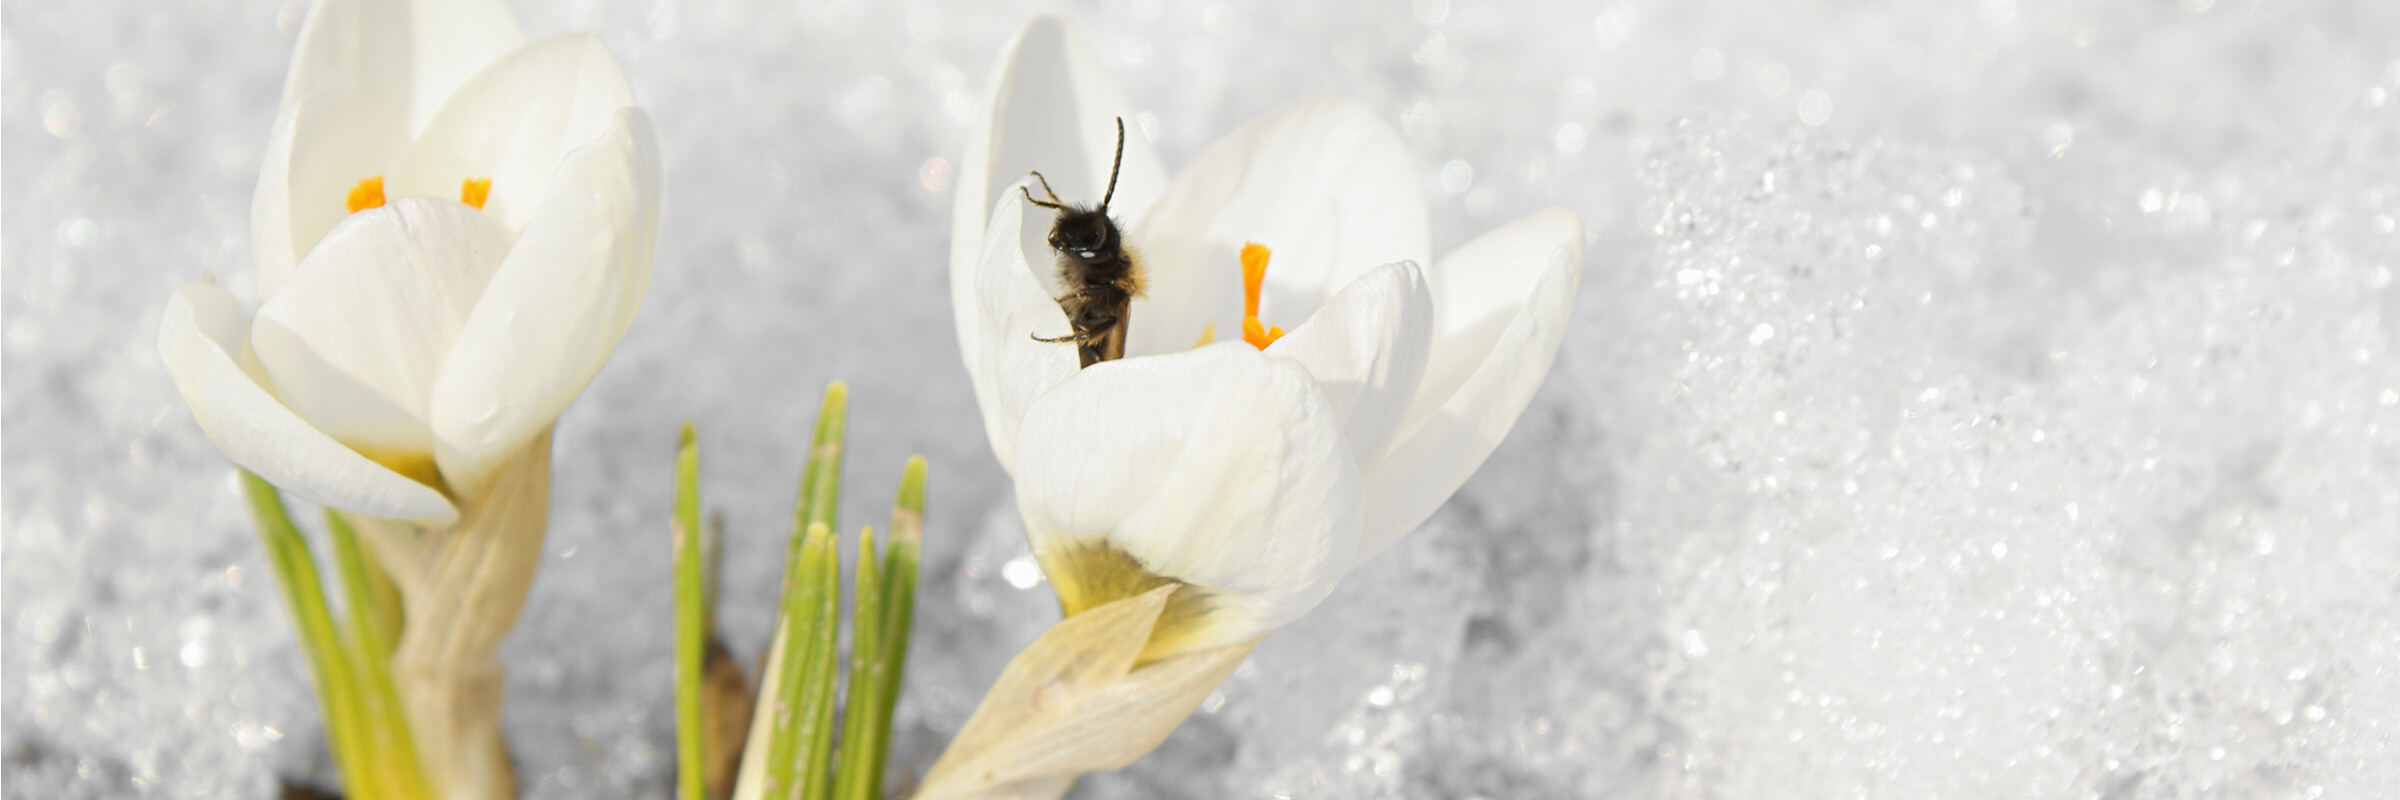 Bee visiting a crocus, one of the few flowers to bloom in early spring